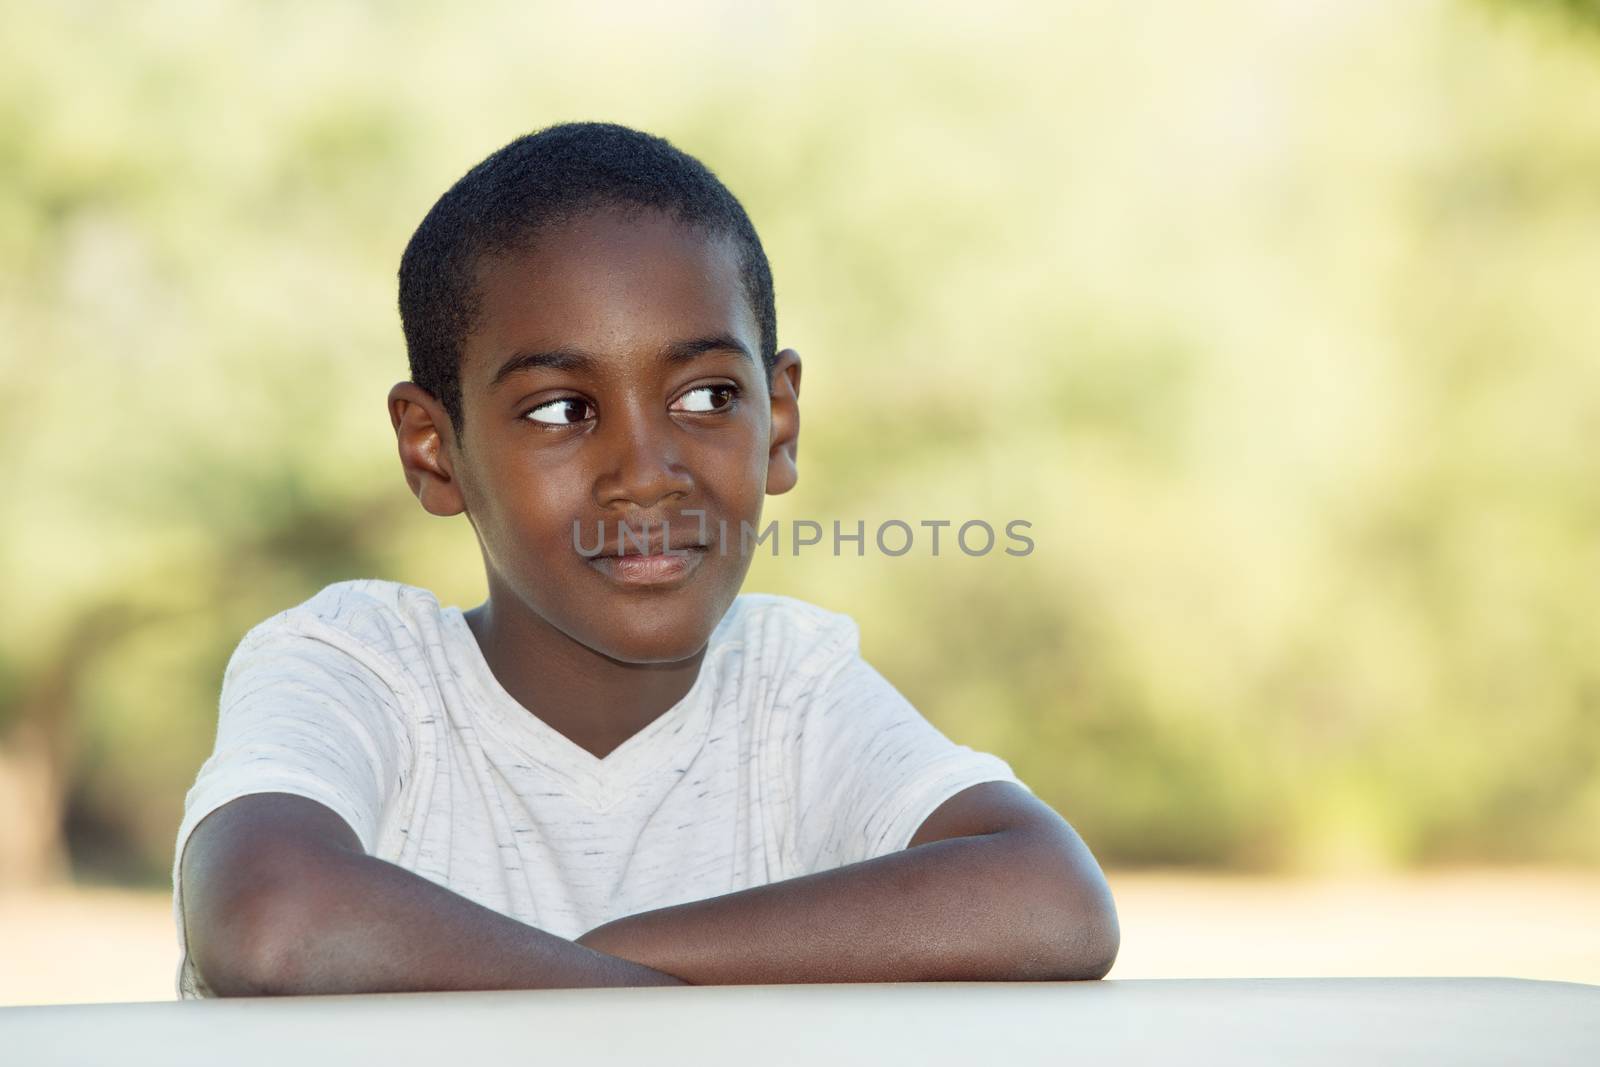 Grinning African child seated at table with copy space to his side